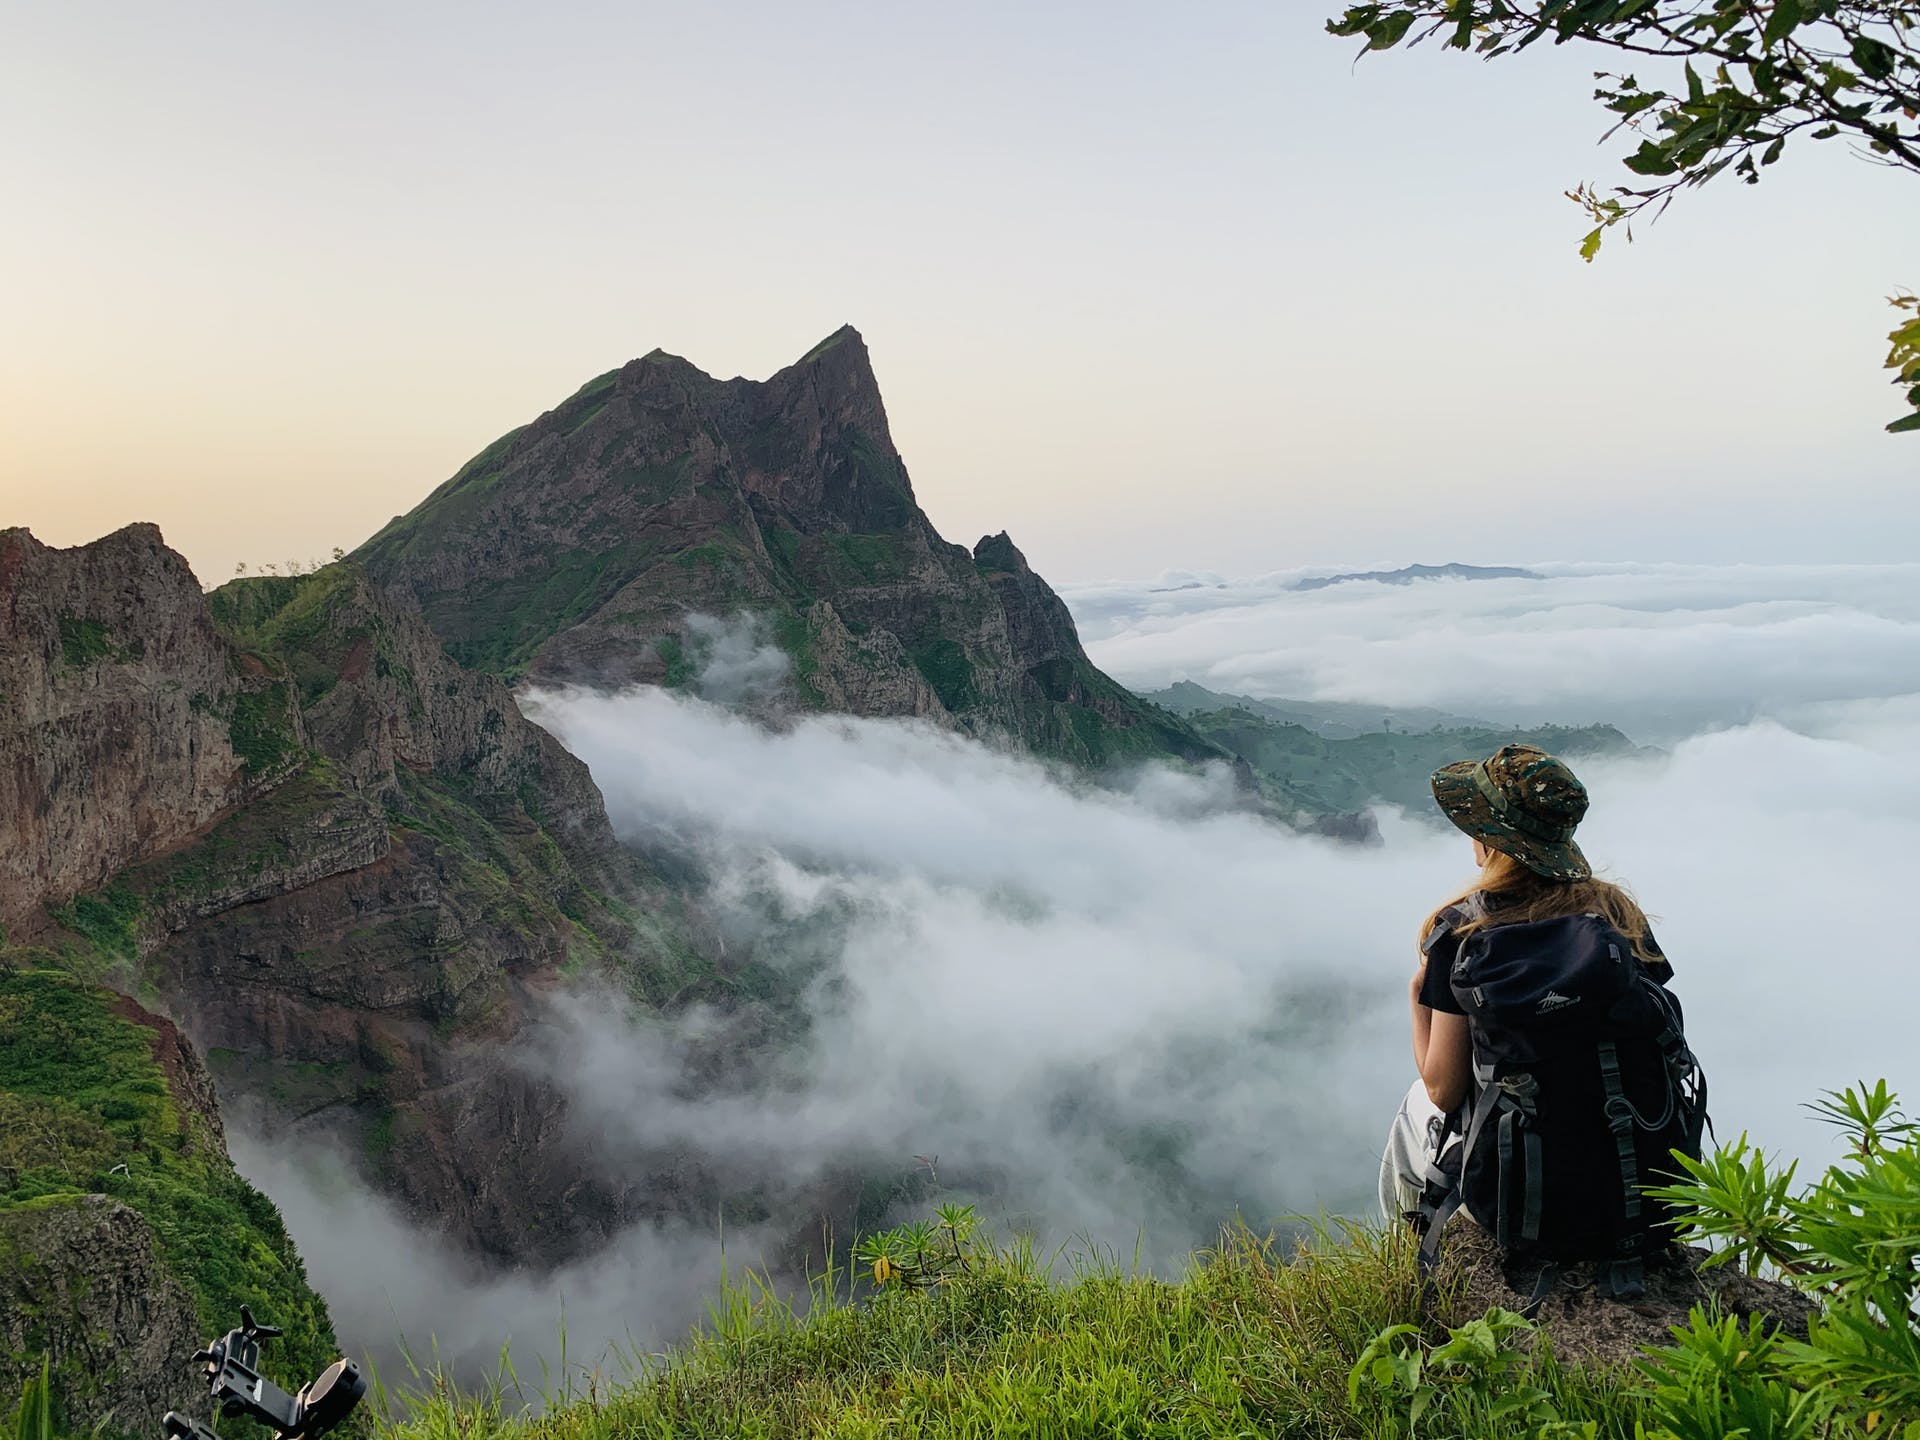 A hiker looks at the peak of Pico do Fogo, in the Cape Verde Islands.